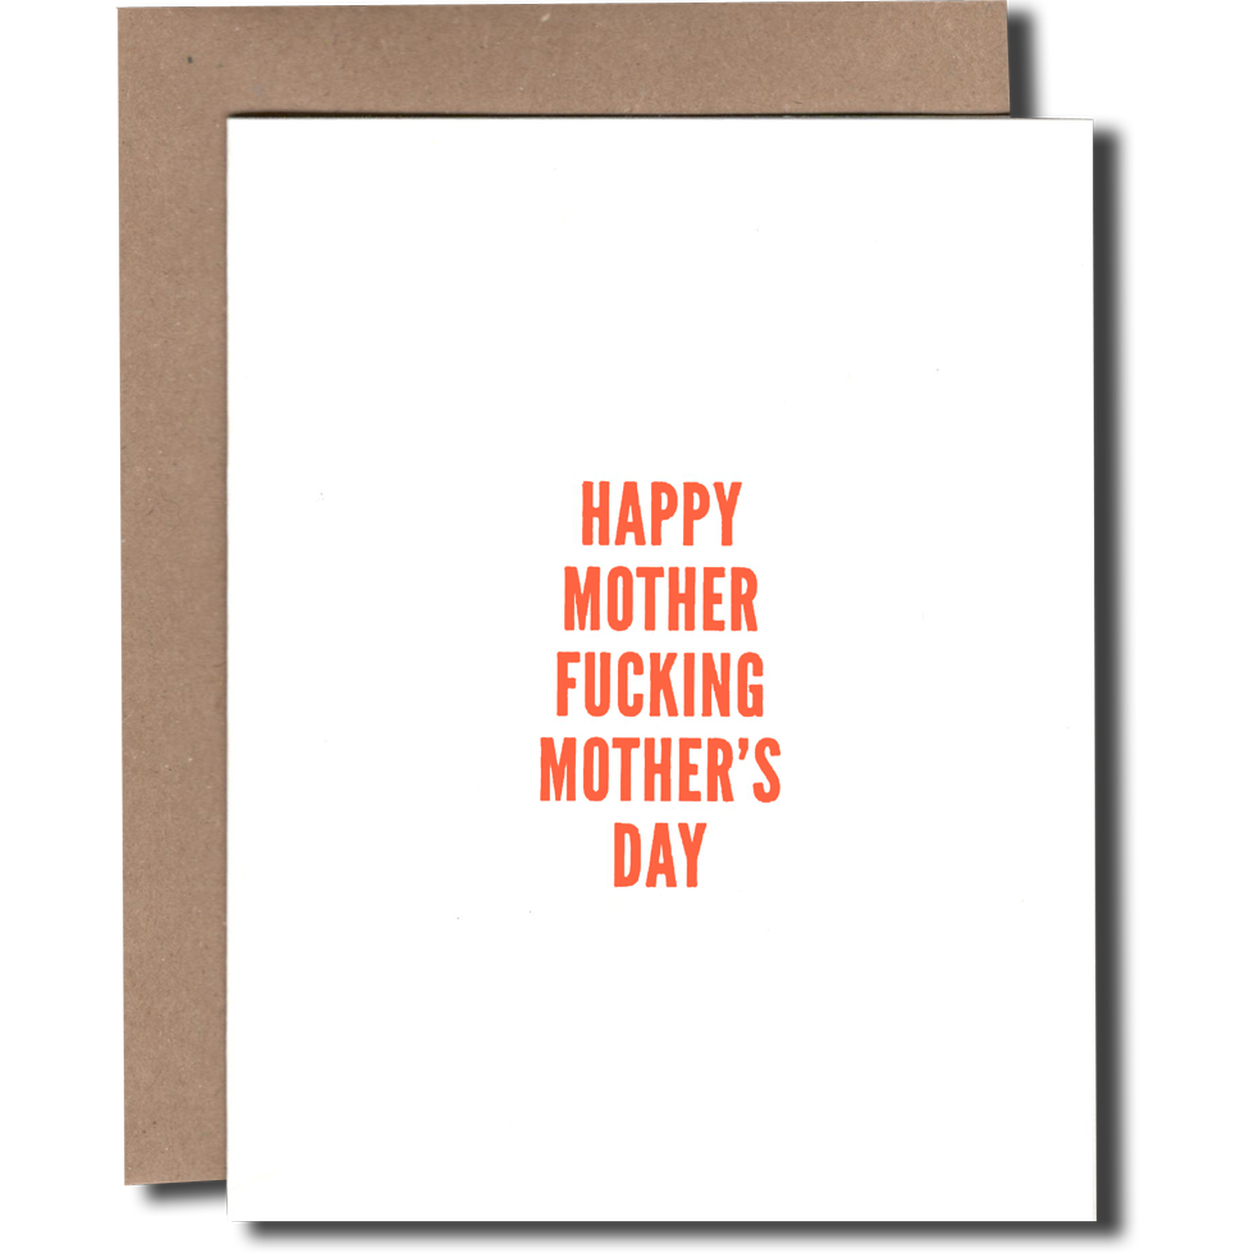 HAPPY MOTHER F*CKING MOTHER'S DAY CARD-POWER AND LIGHT PRESS-Kitson LA